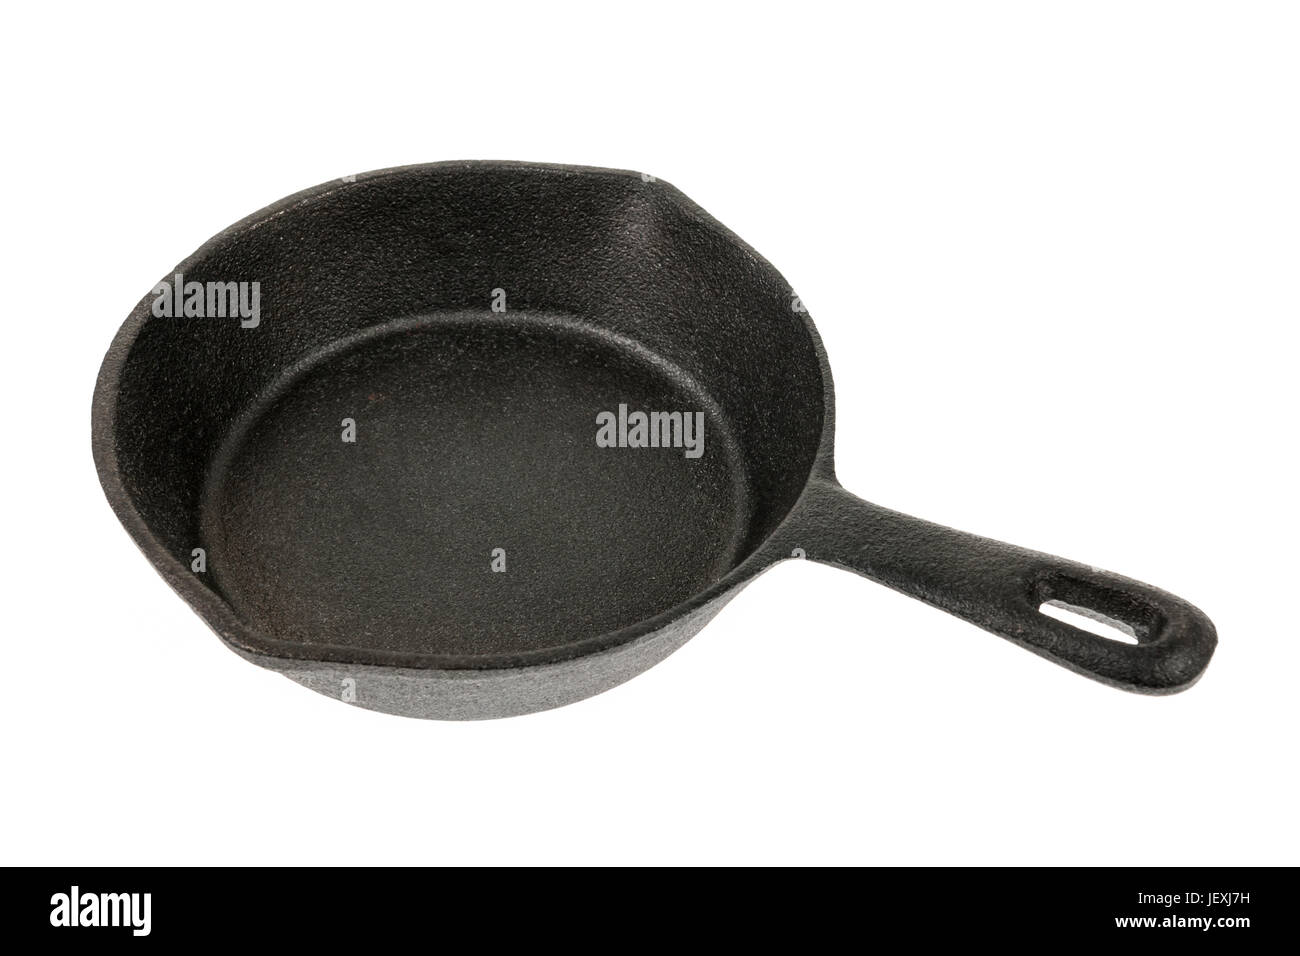 https://c8.alamy.com/comp/JEXJ7H/cast-iron-black-frying-pan-isolated-on-white-background-side-view-JEXJ7H.jpg